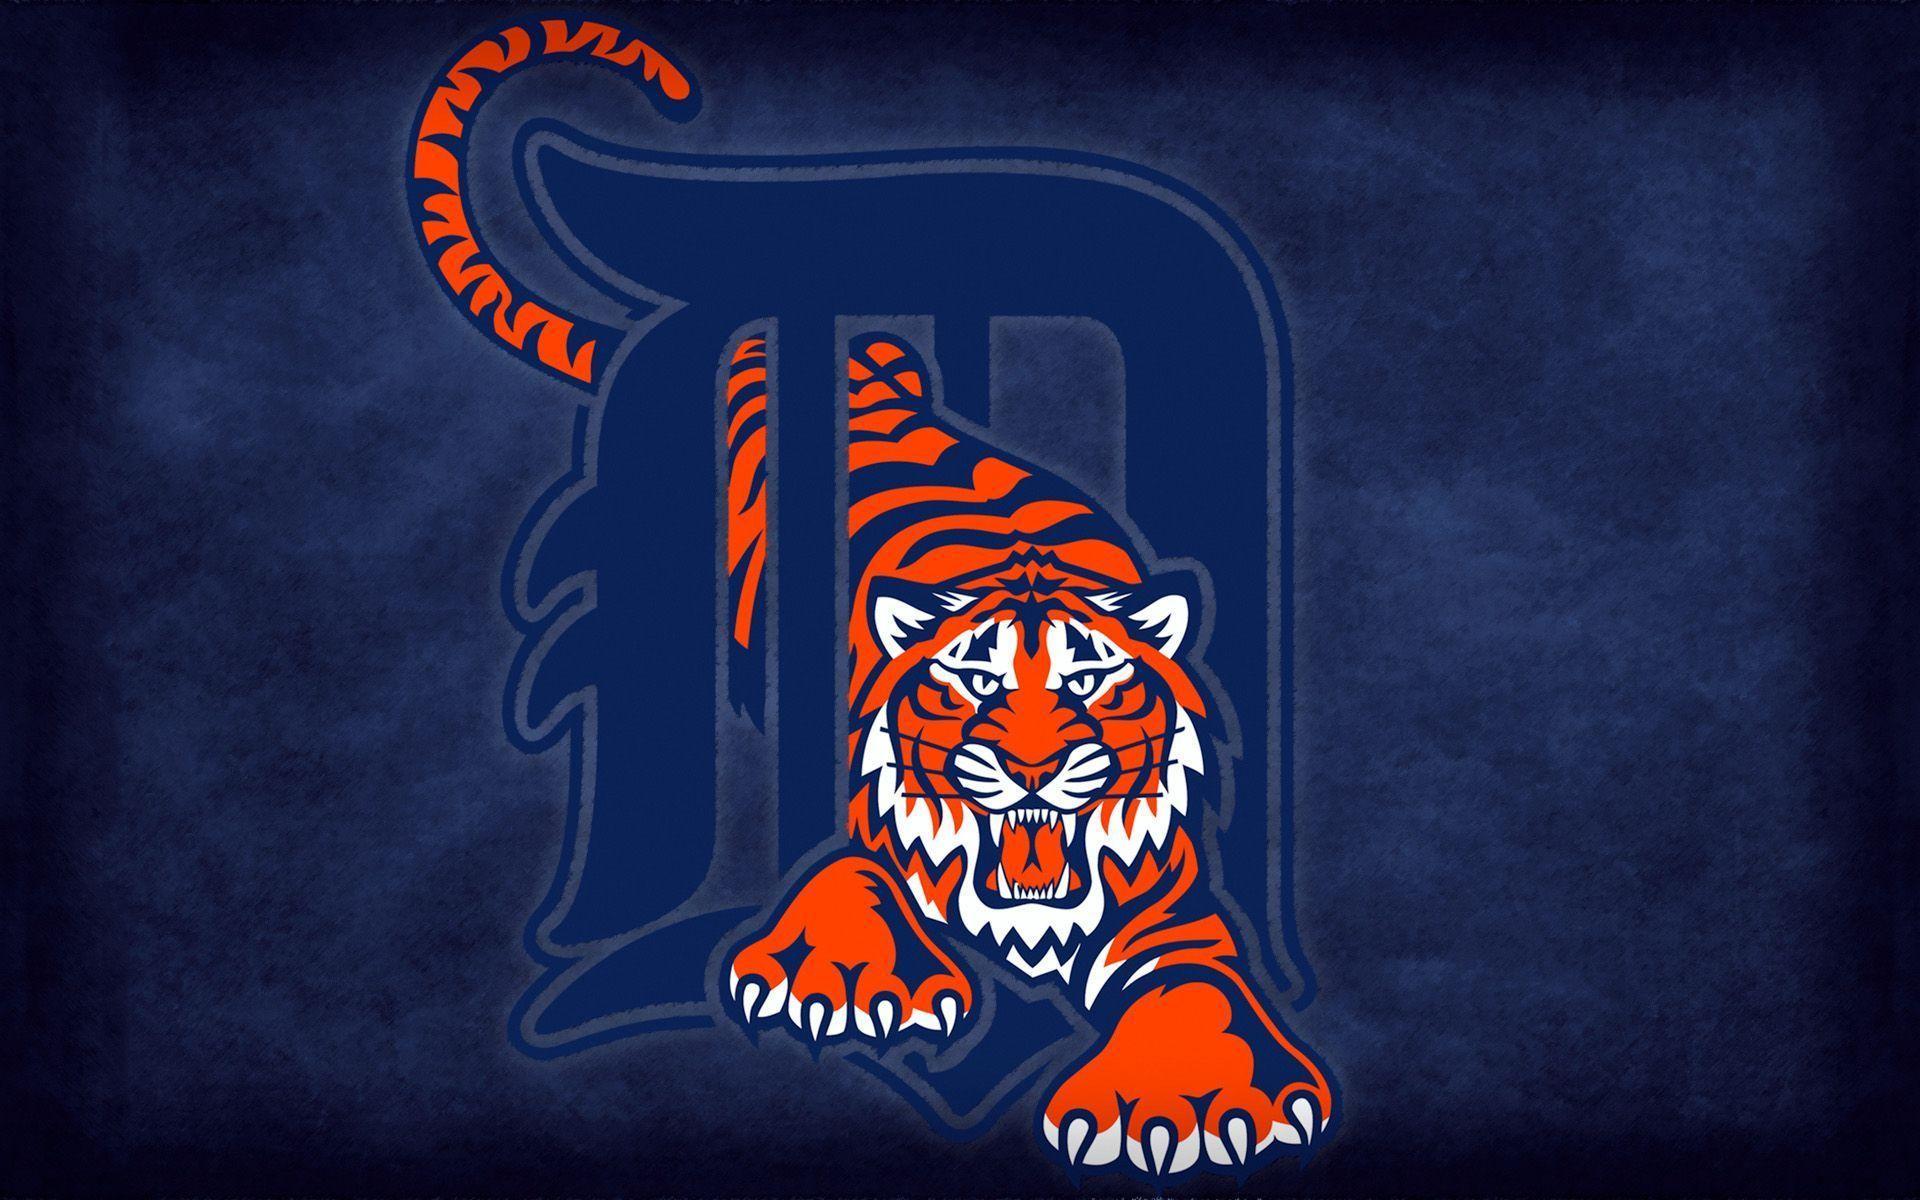 Detroit Tigers Wallpapers 13595 1920x1200 px